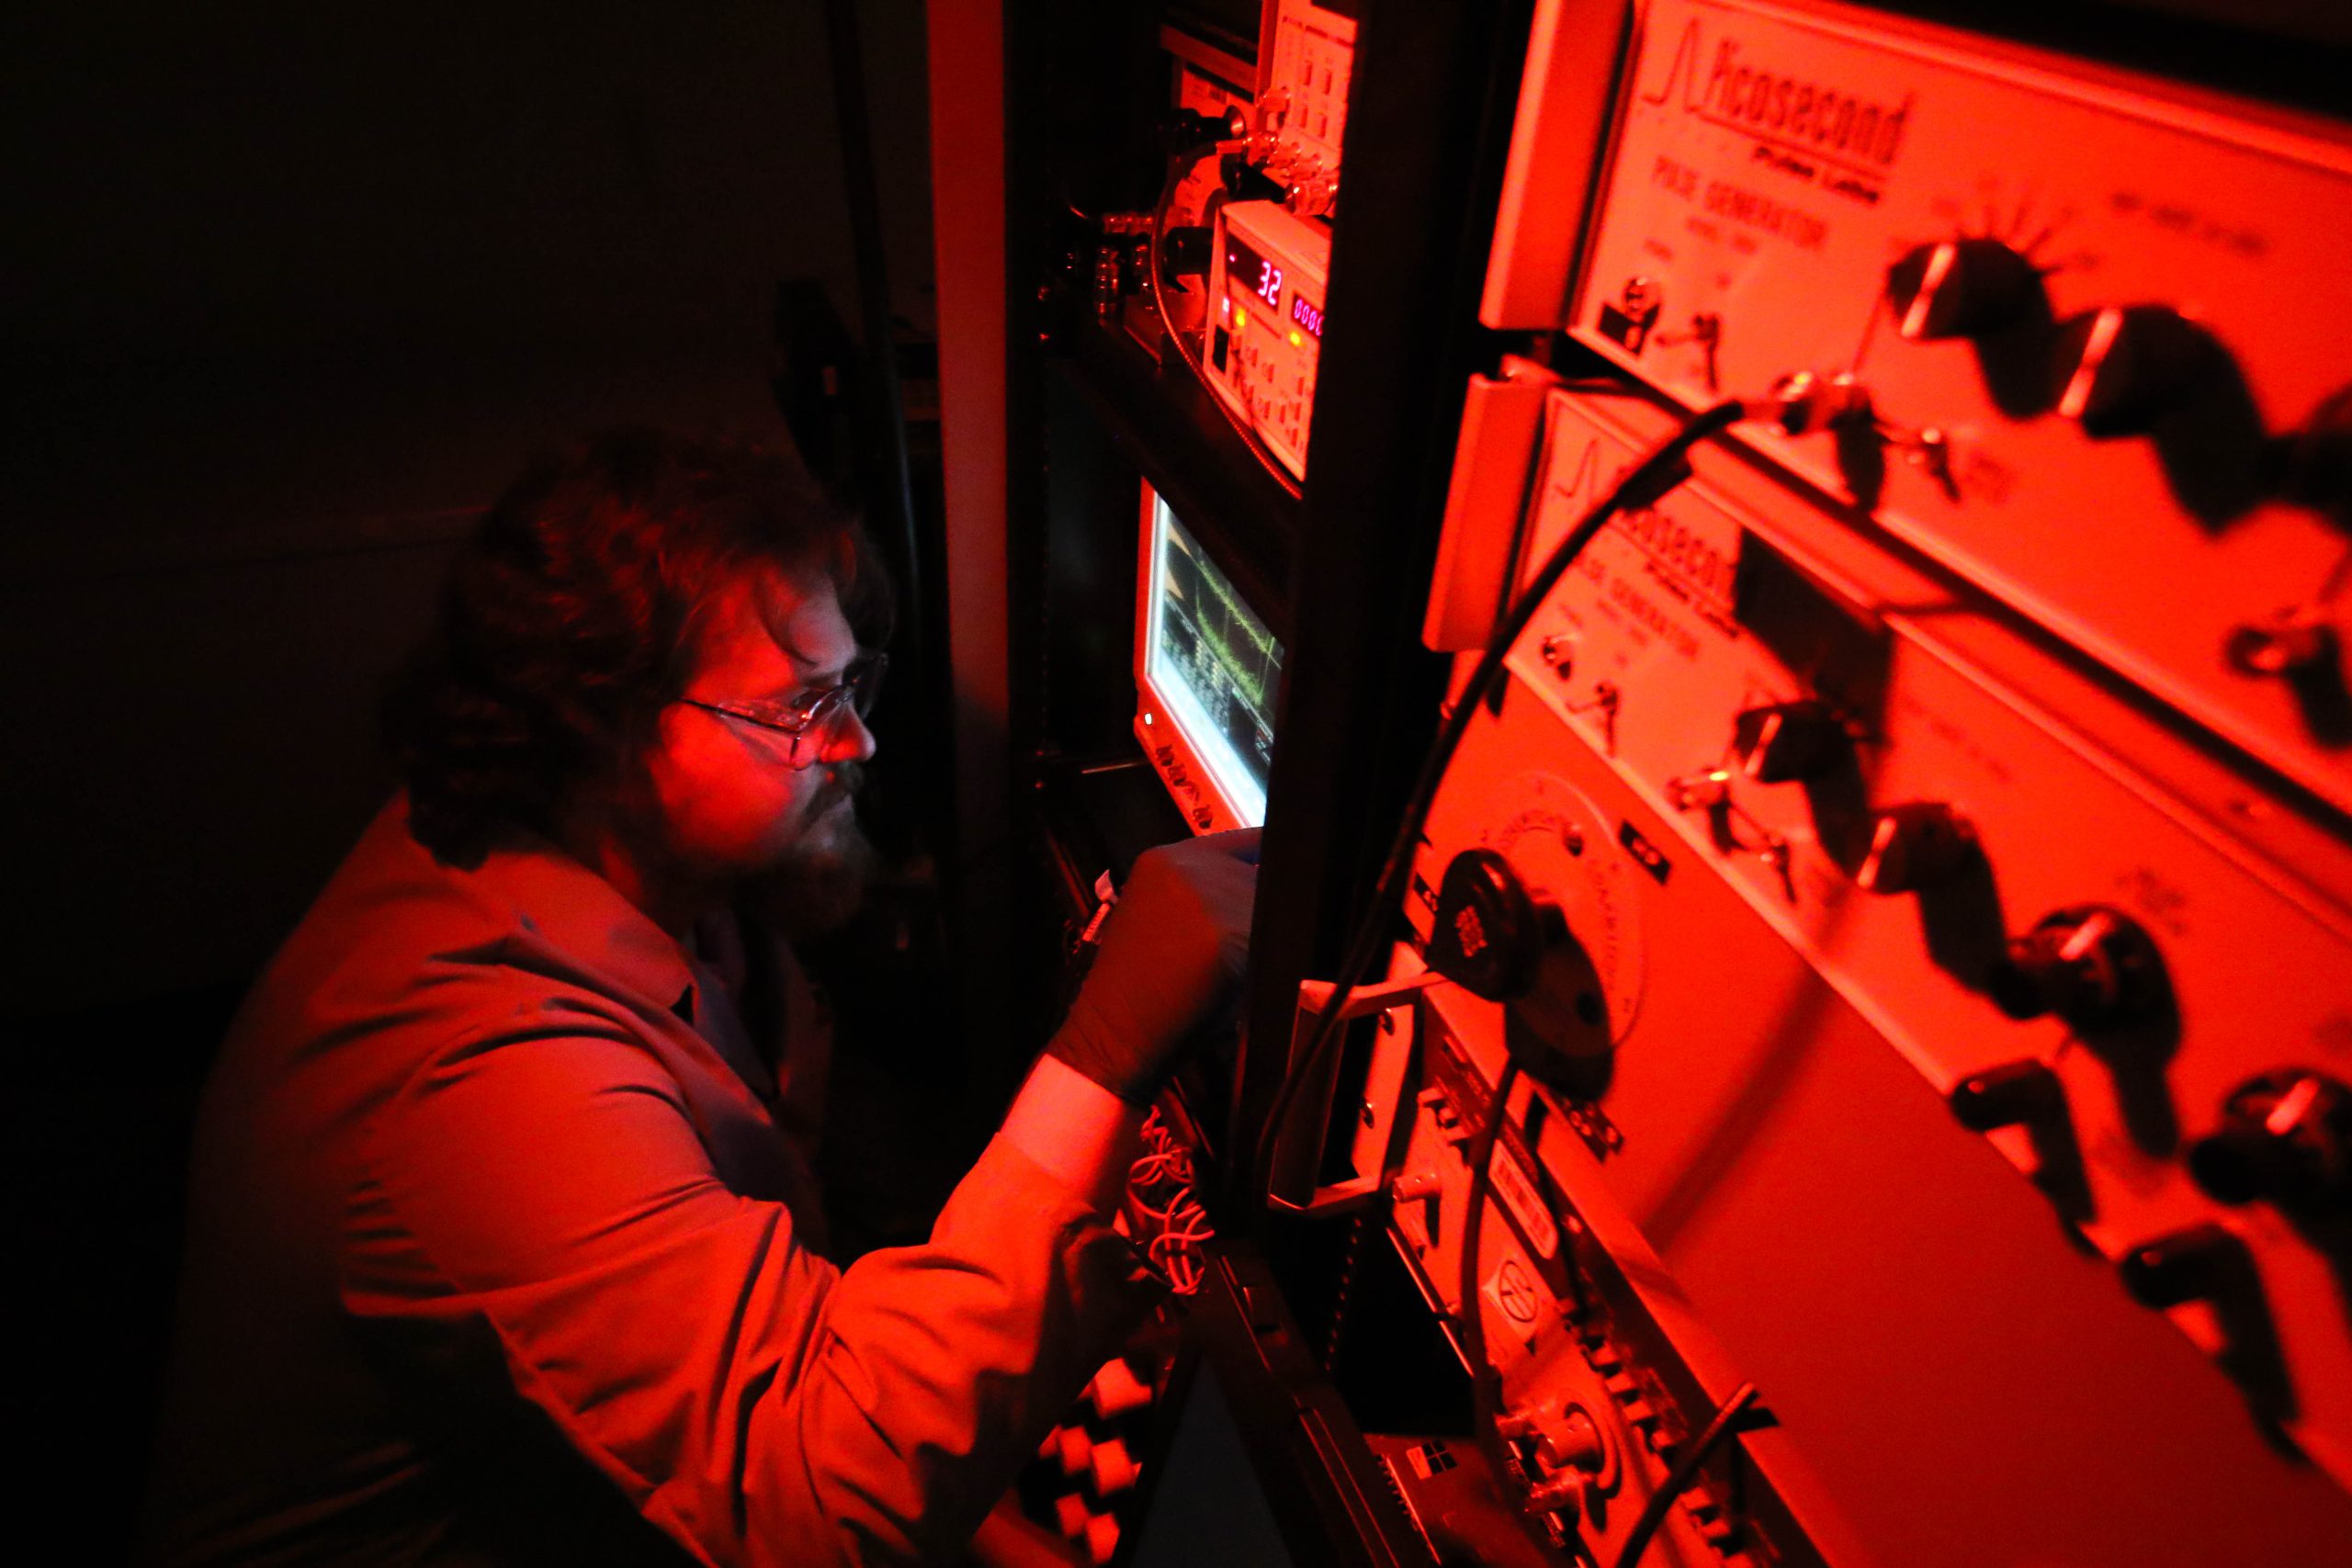 A man makes machine adjustment in a room lit with a red glow.